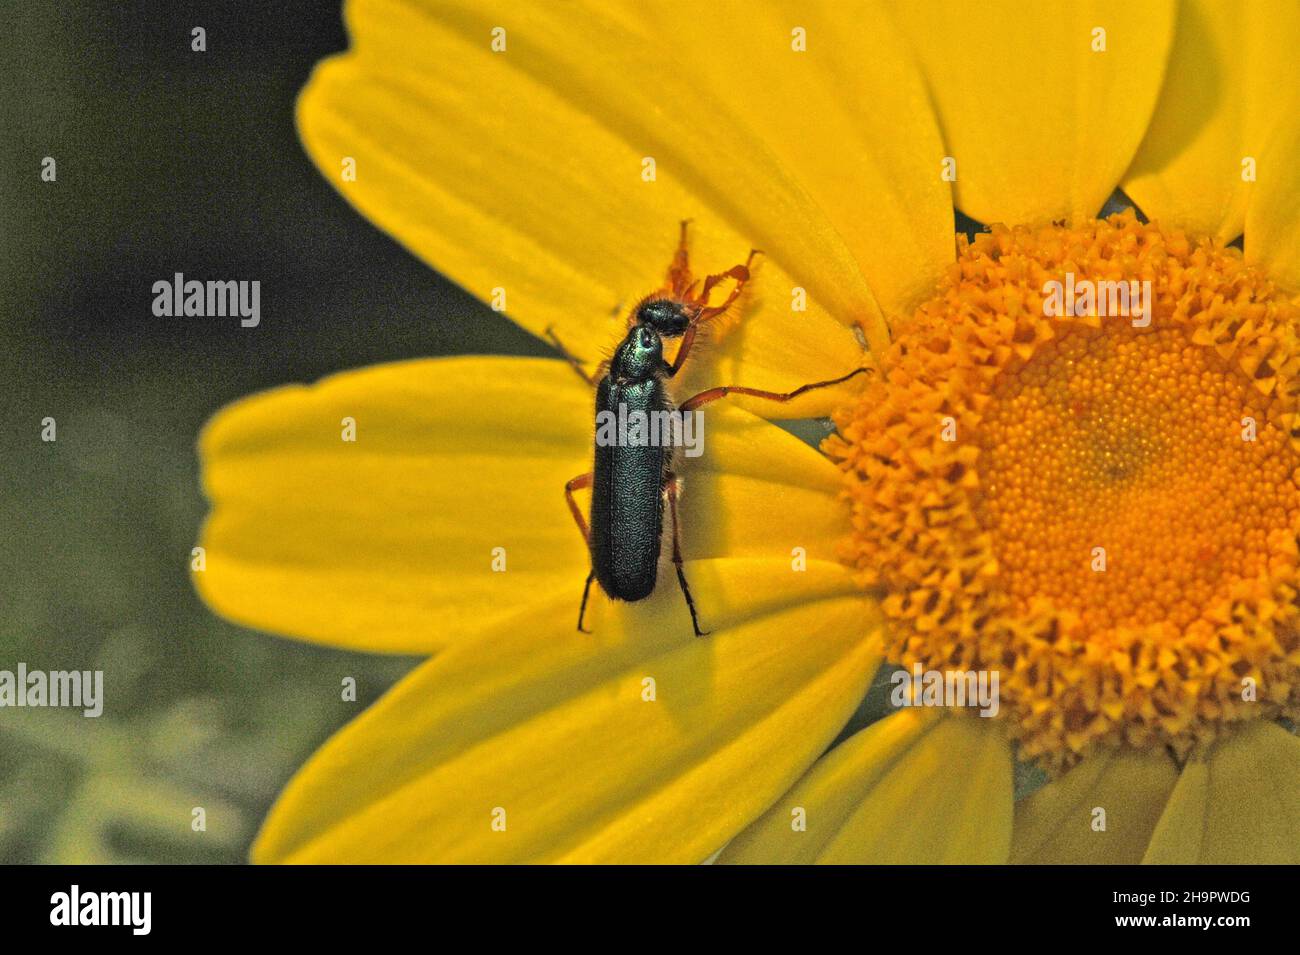 Beetle on yellow flower (Cerocoma), genus Blister beetle, insect, arthropod, family Meloides Stock Photo